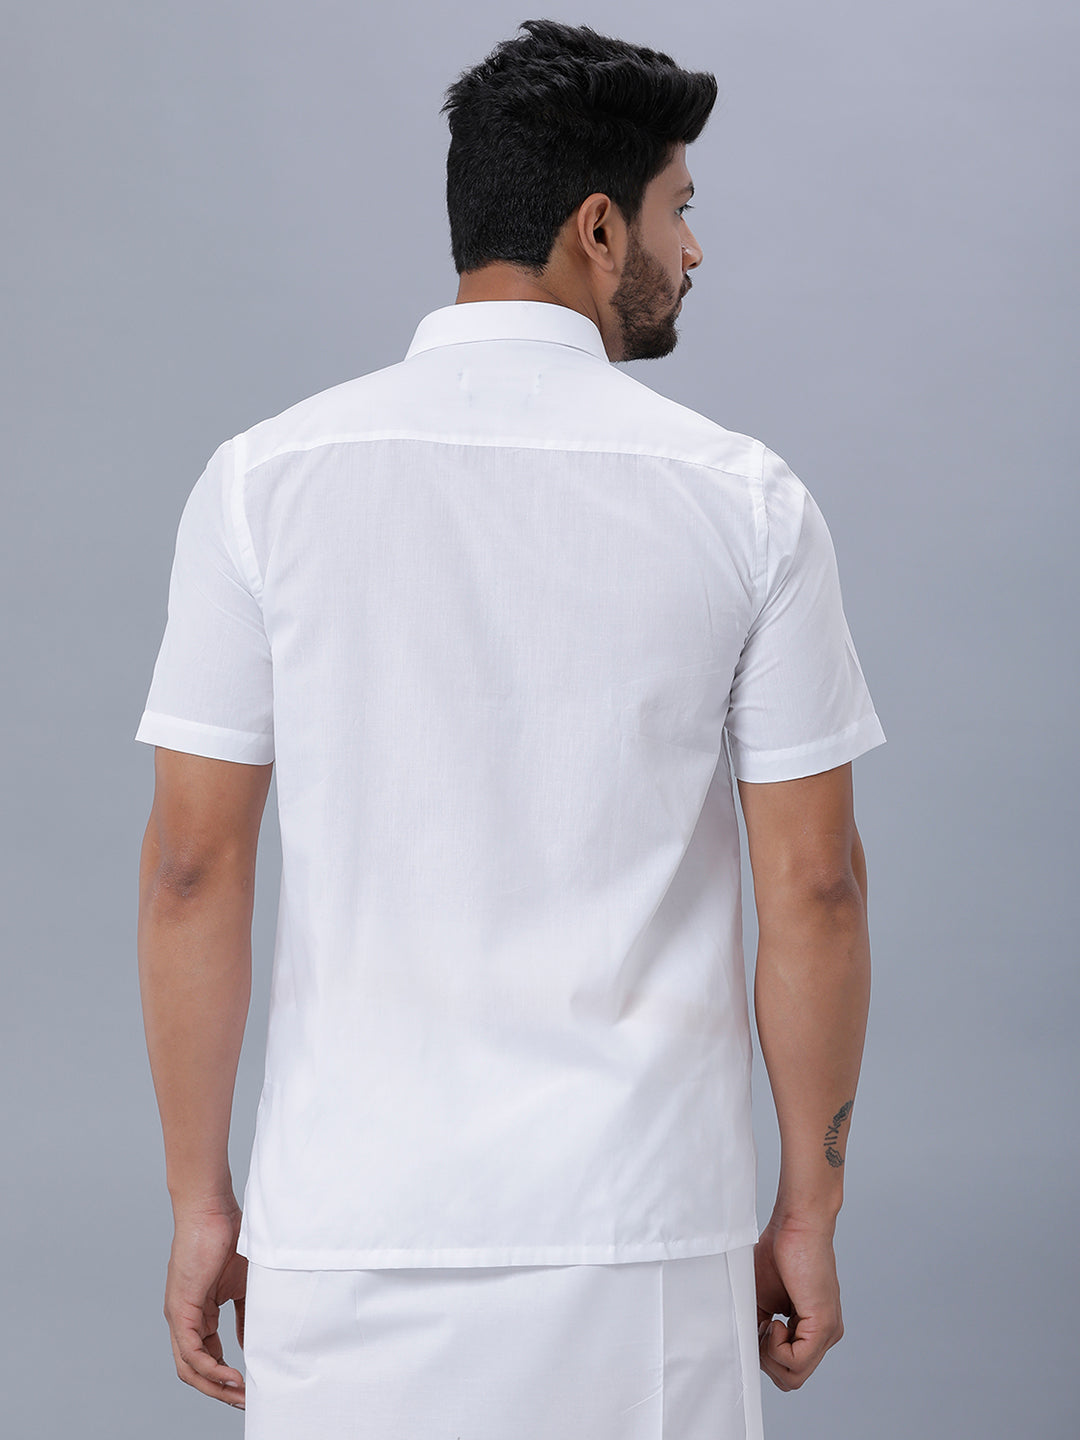 Mens Premium Pure Cotton White Shirt Half Sleeves Ultimate R7-Back view